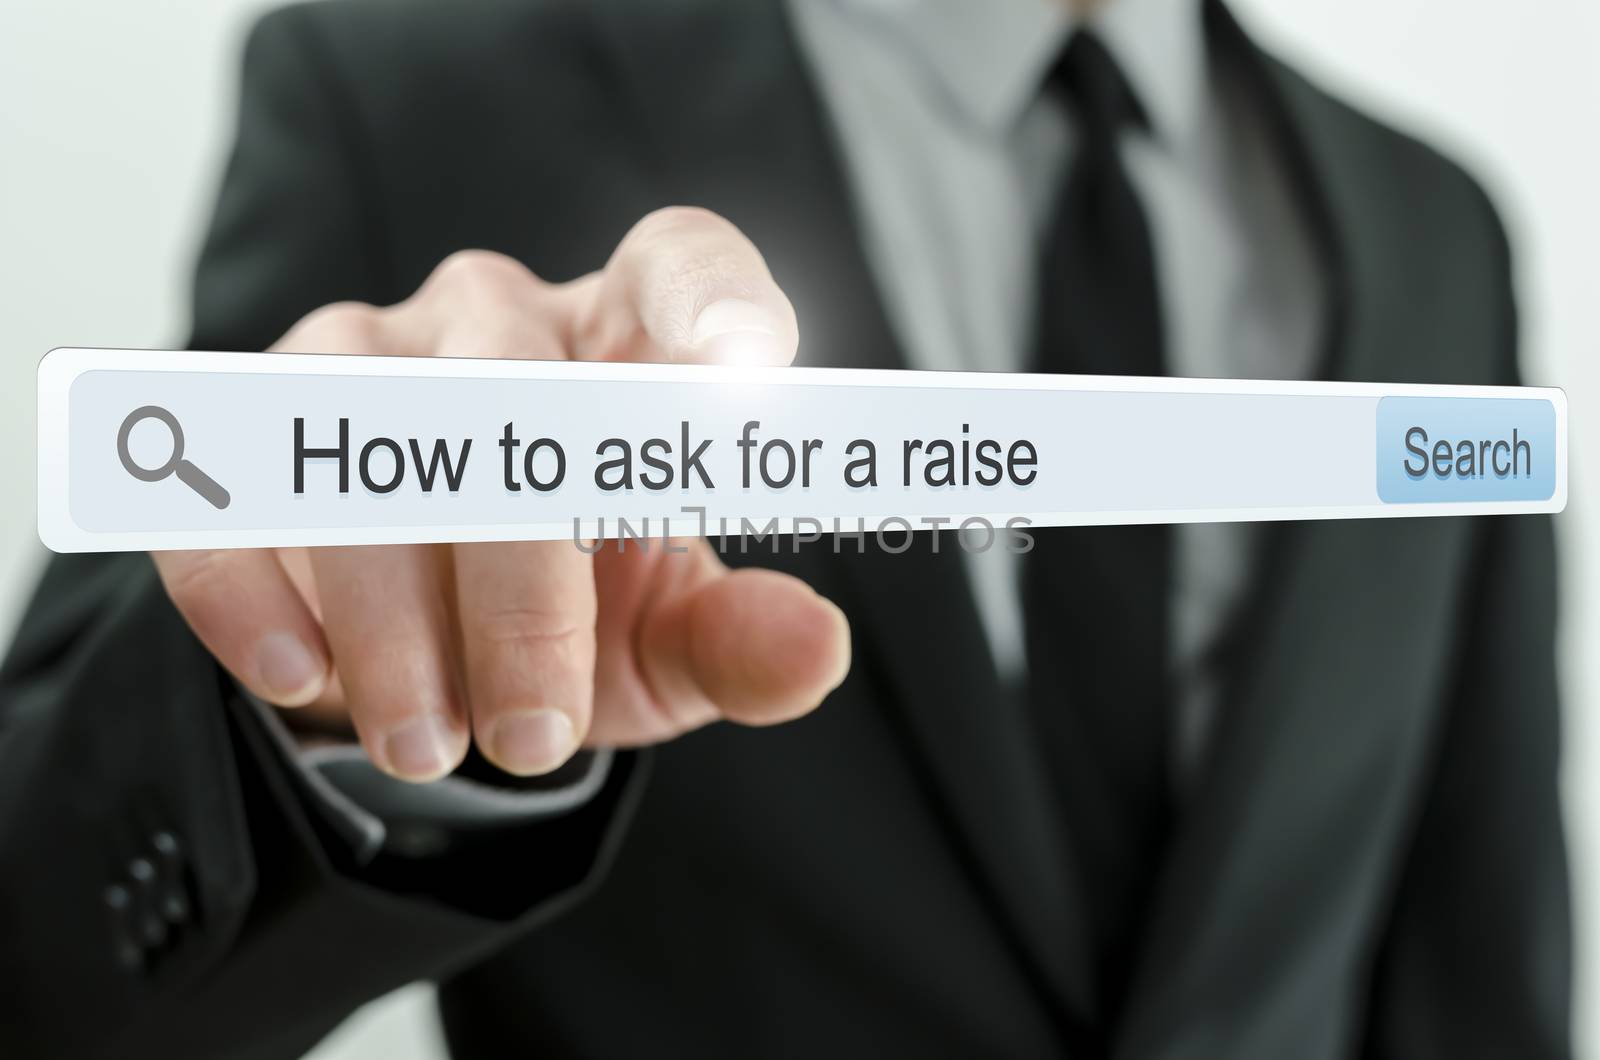 How to ask for a raise written in search bar by Gajus